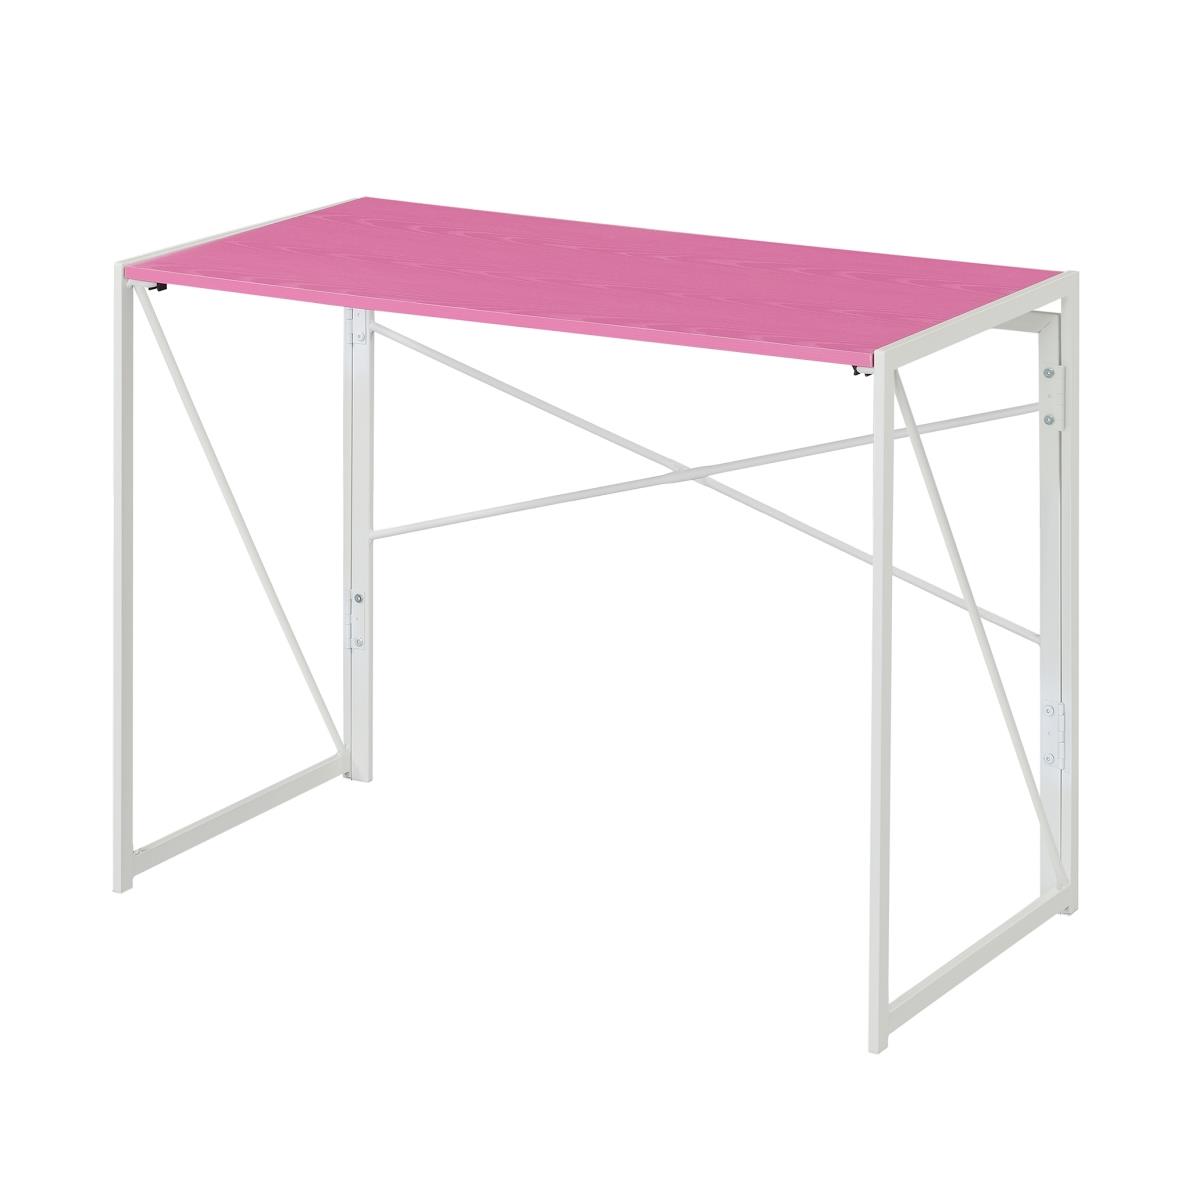 Picture of Convenience Concepts 090110PKWF 39.5 x 19.75 x 29 in. Xtra Folding Desk